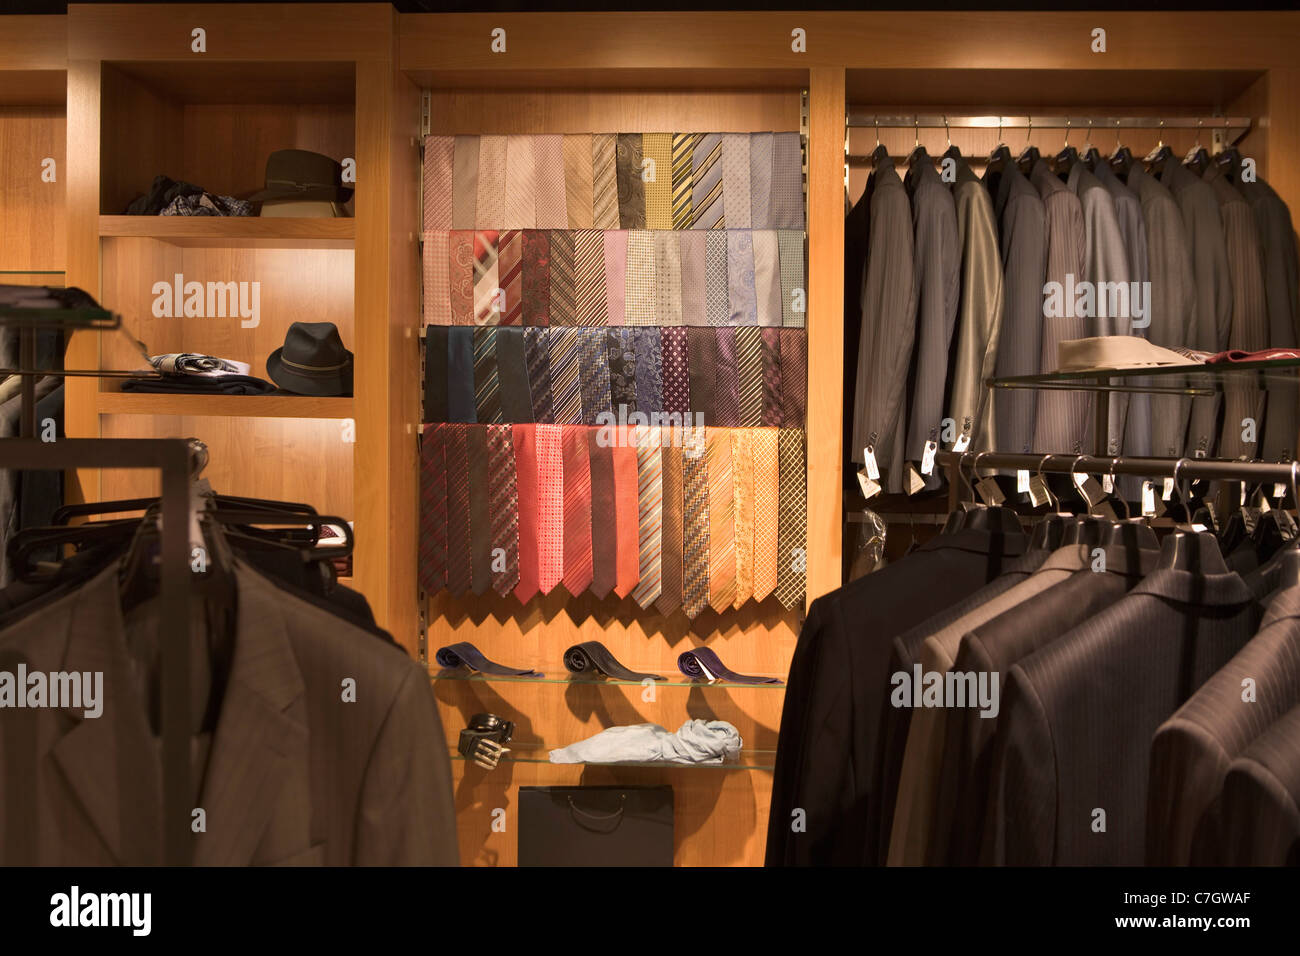 Ties on display in a menswear store Stock Photo, Royalty Free Image ...